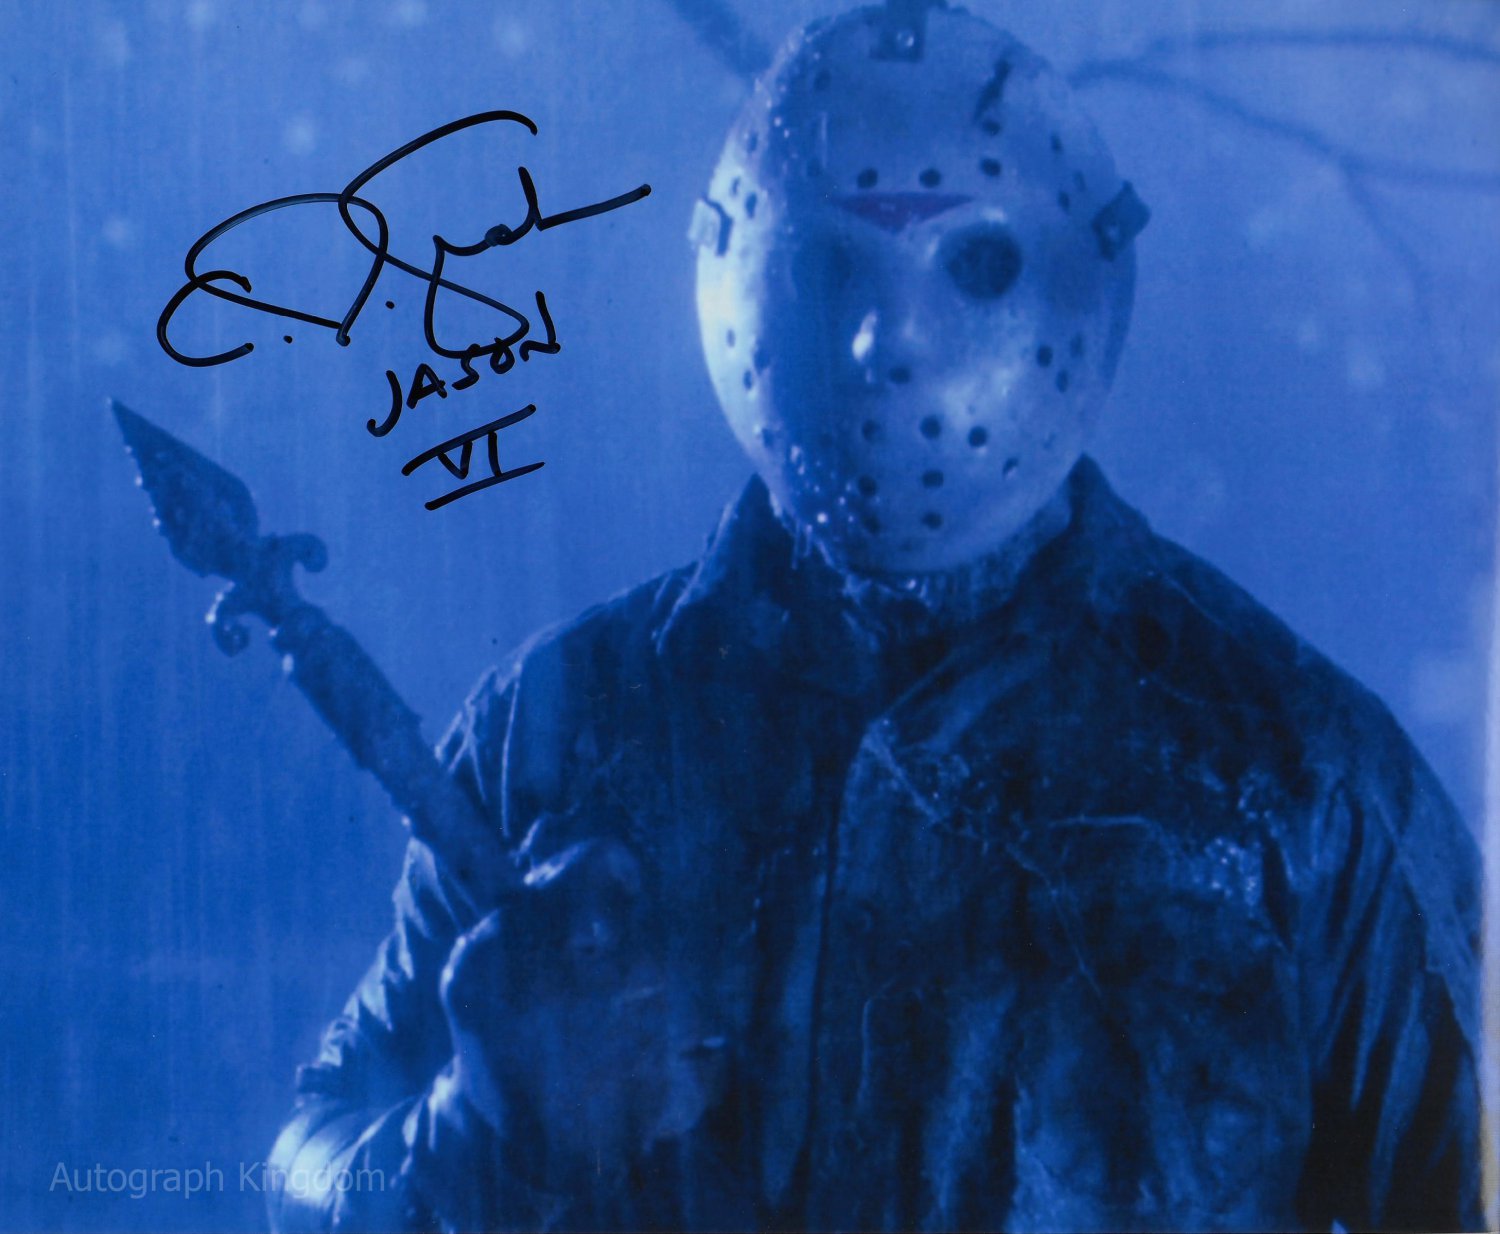 C.J Graham as Jason Voorhees Signed & Mounted 8 x 10" Autographed Photo (Reprint:1443)